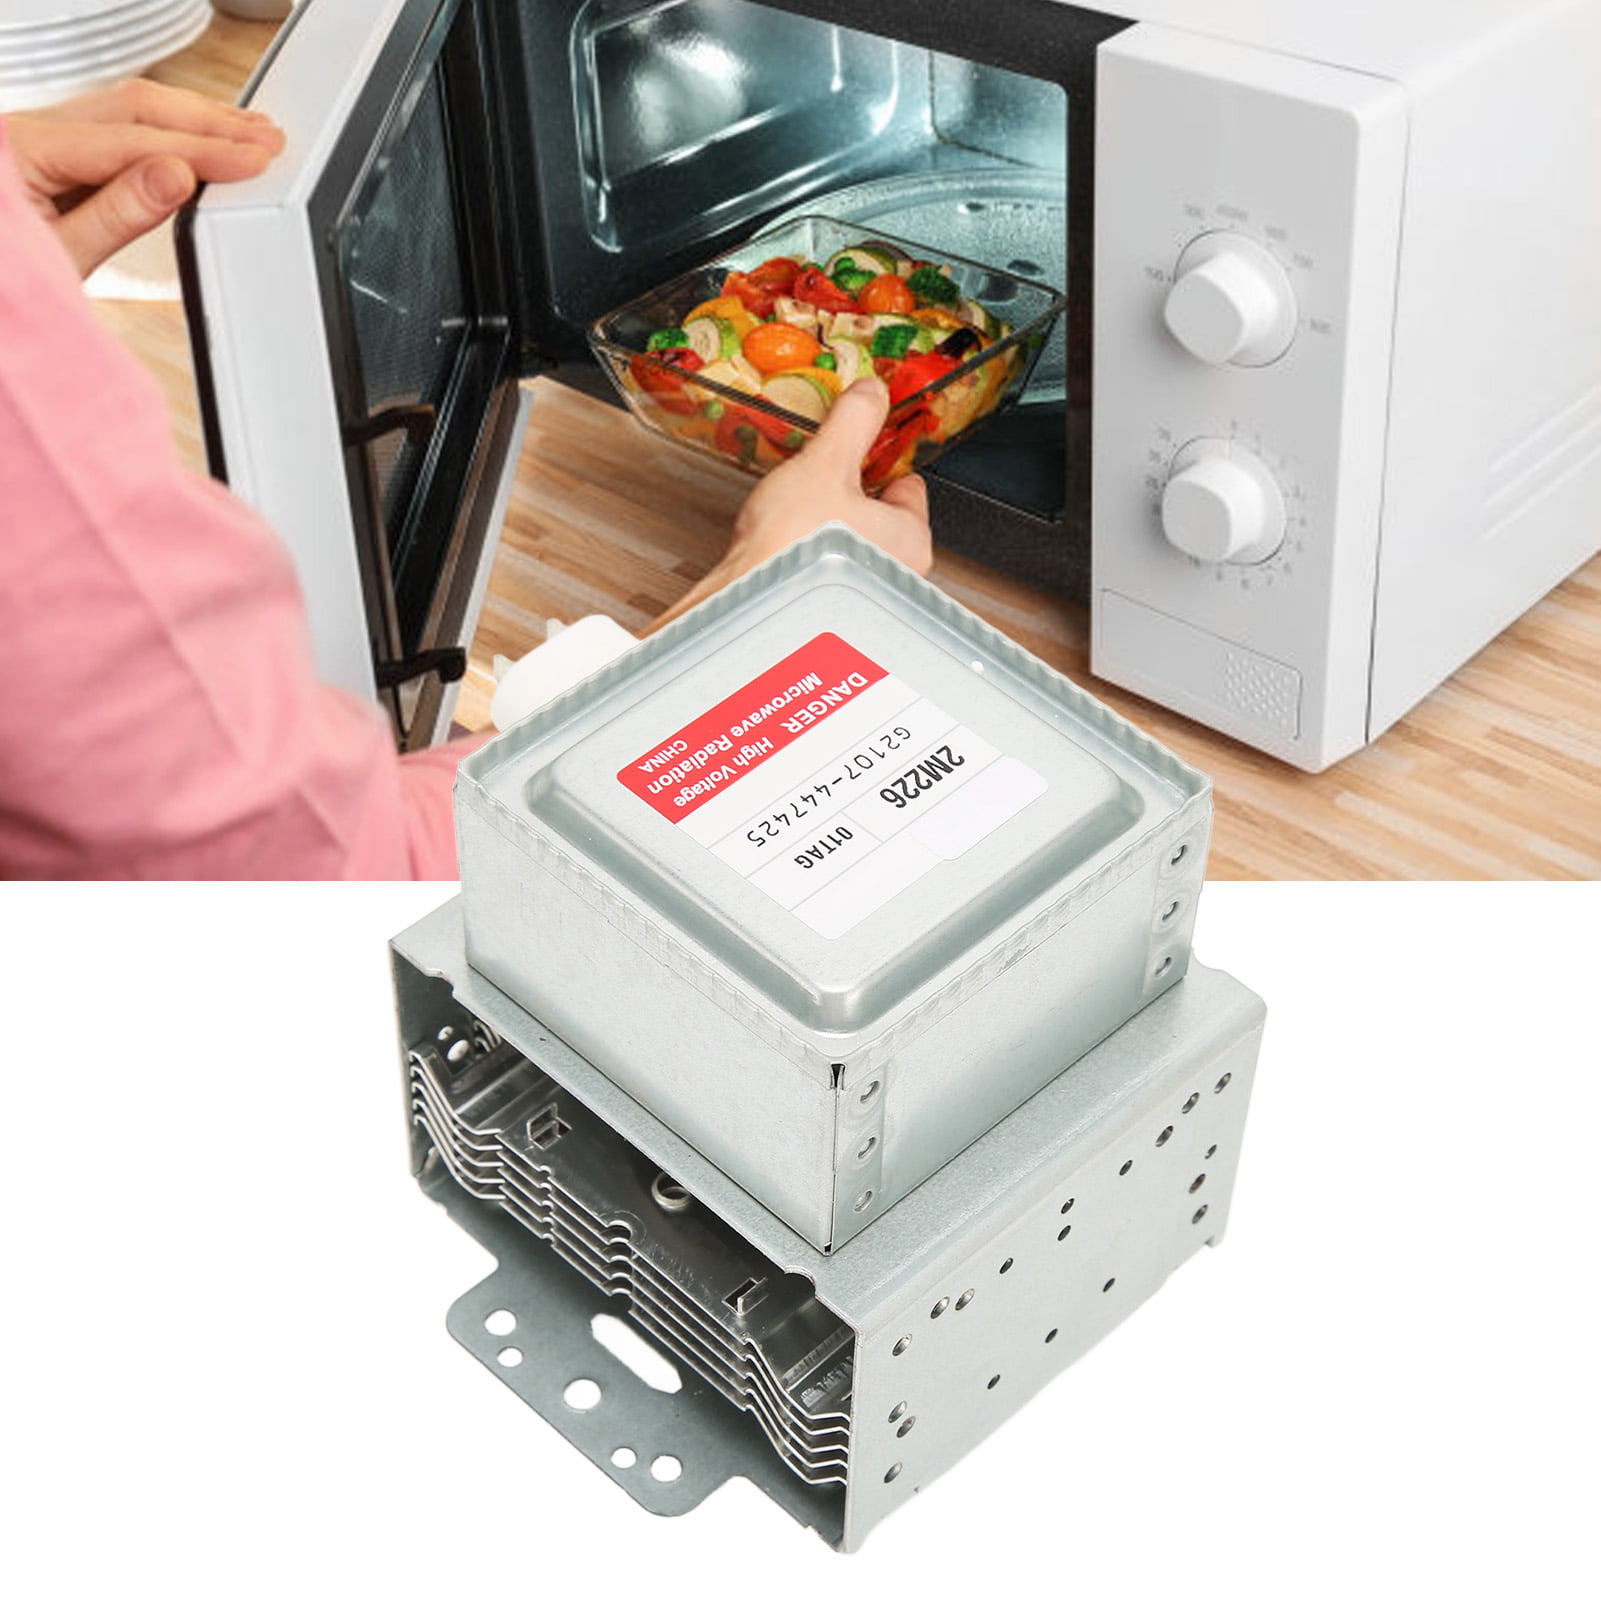  ZGydnm Microwave Oven Accessories Microwave Oven